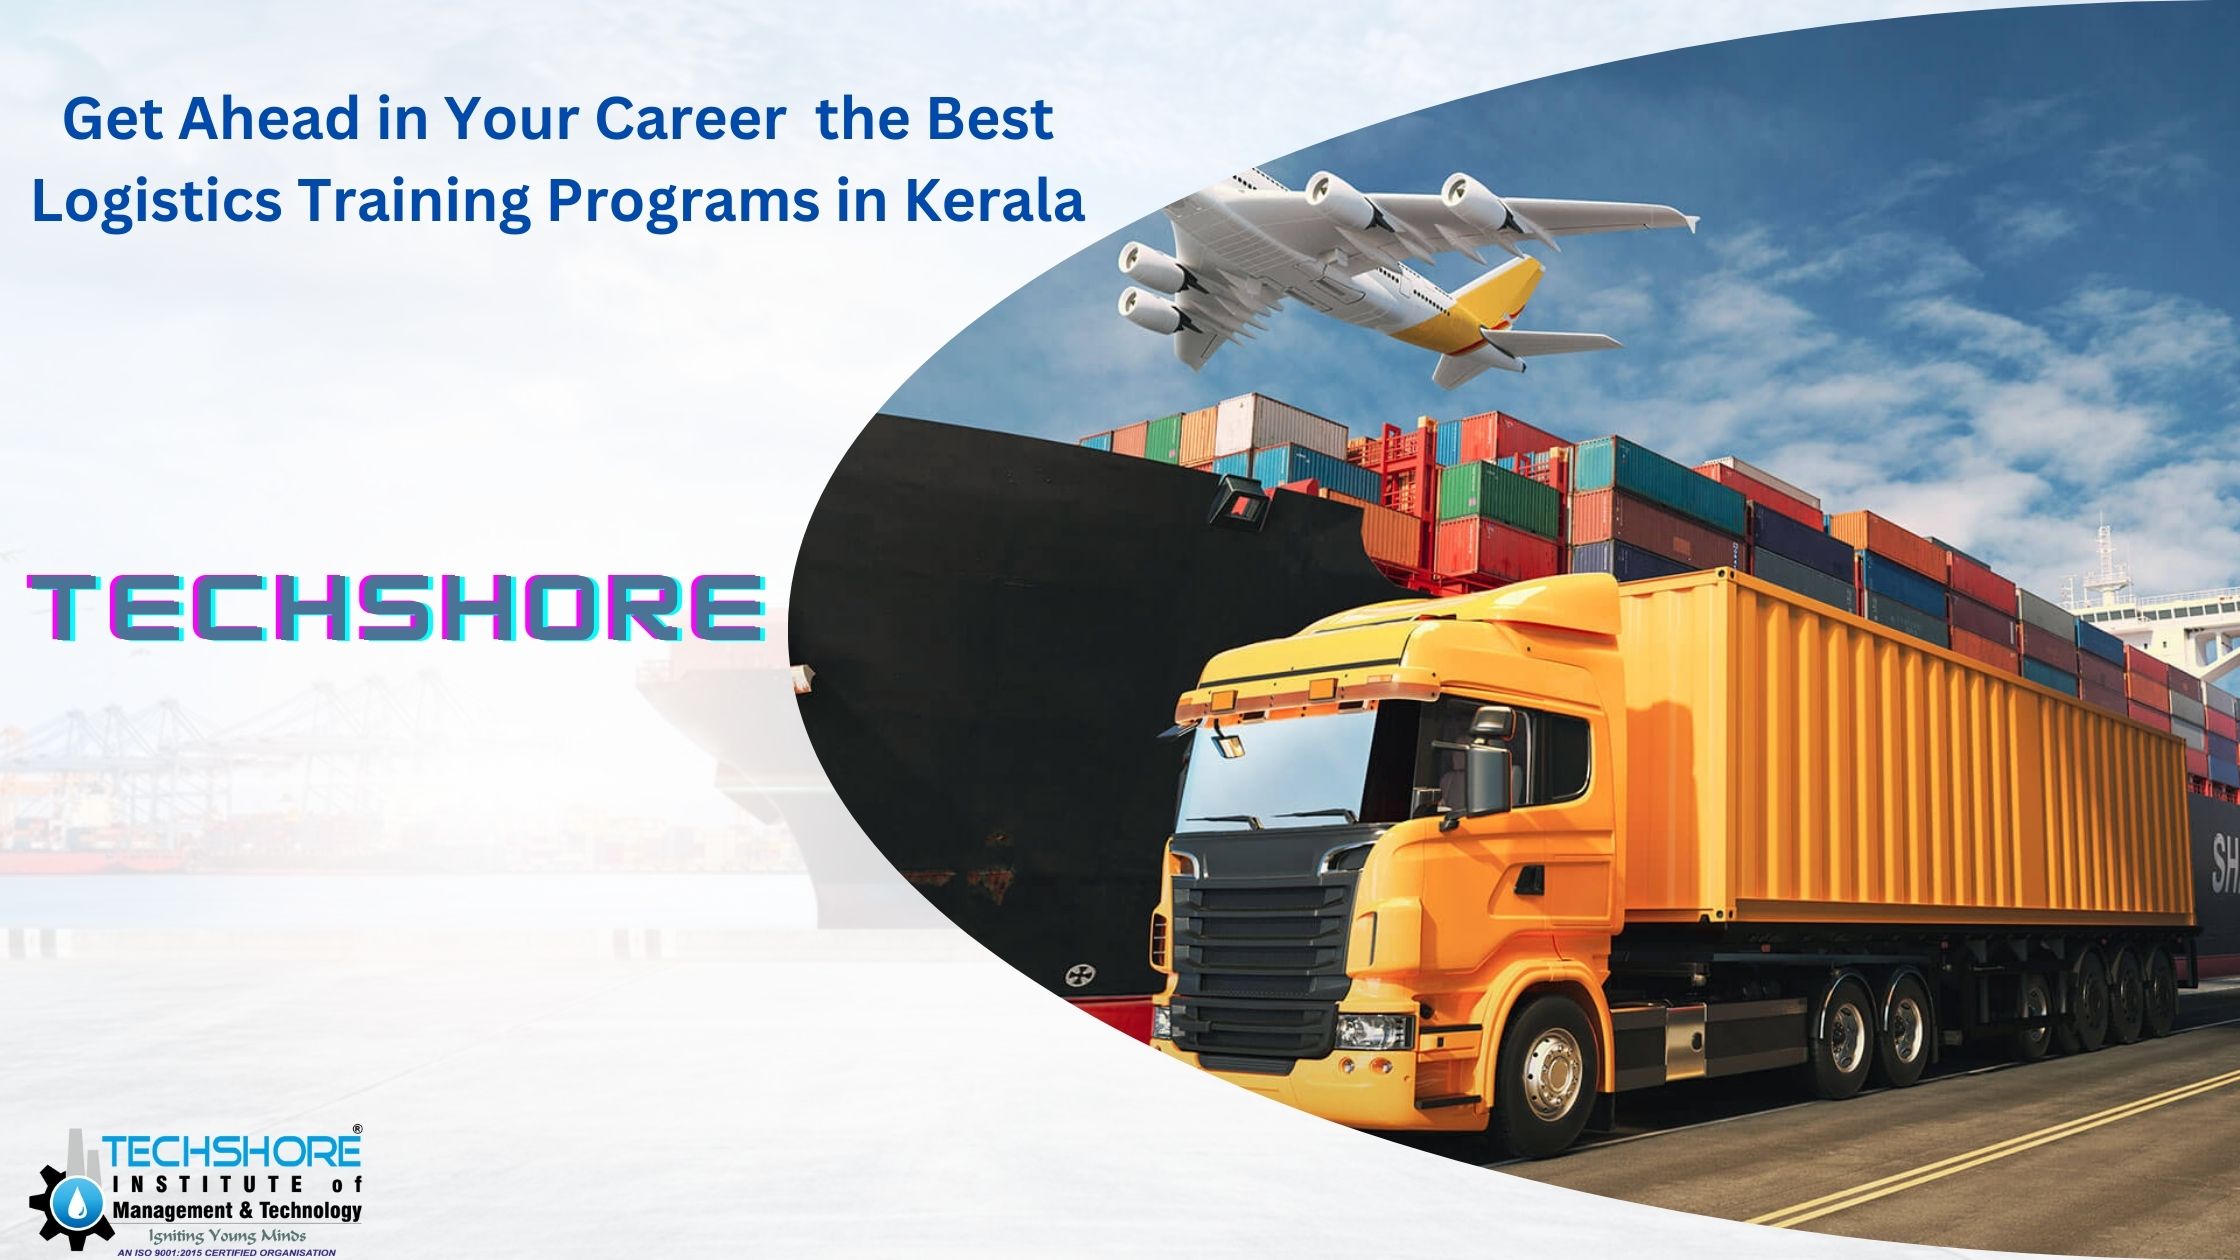 Get Ahead in Your Career with the Best Logistics Training Programs in Kerala